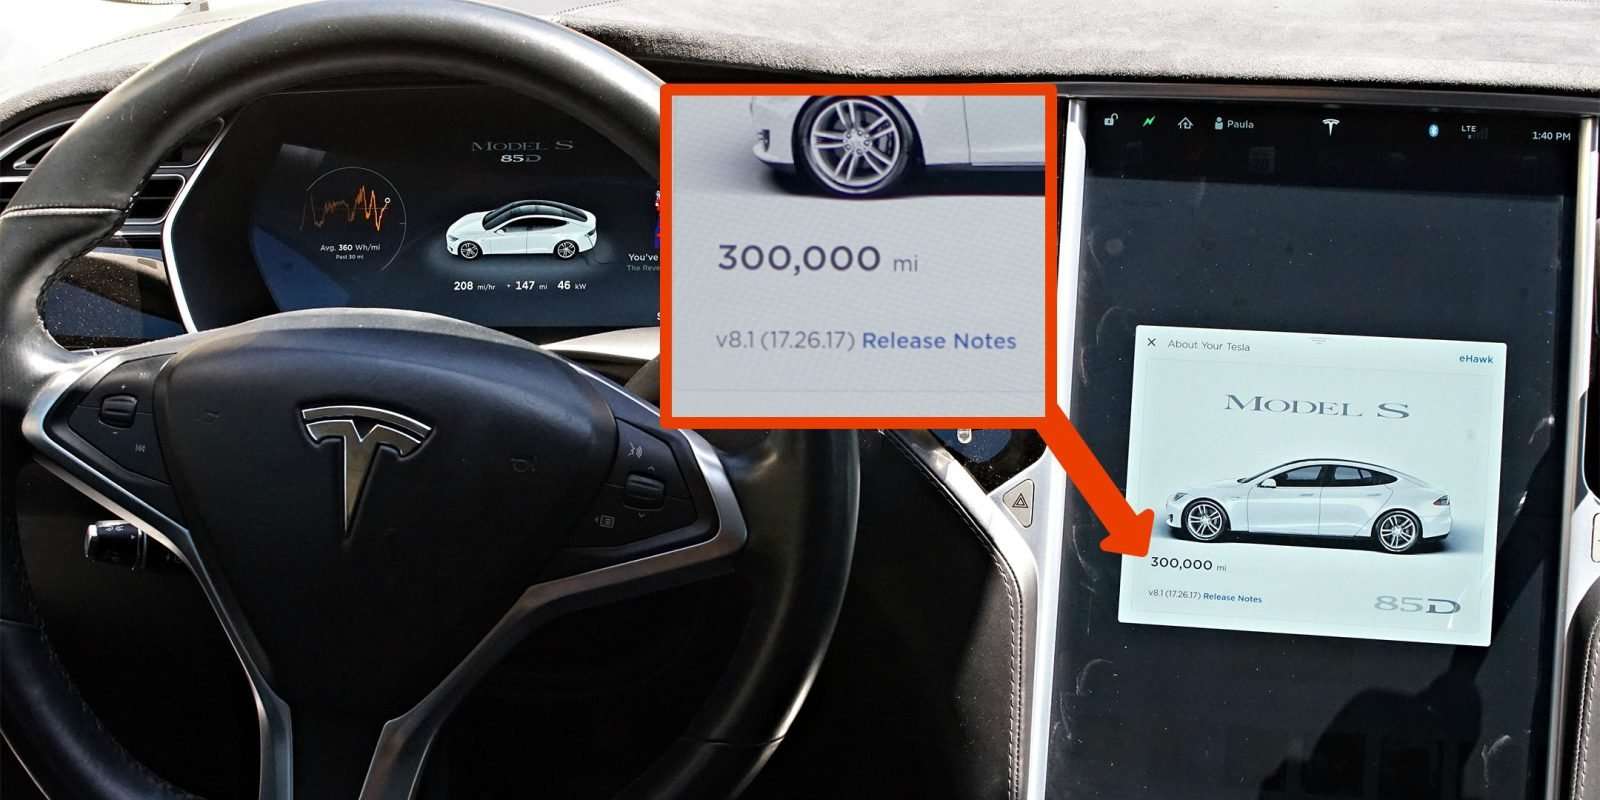 image for A Tesla Model S hits 300,000 miles in just 2 years – saving an estimated $60,000 on fuel and maintenance